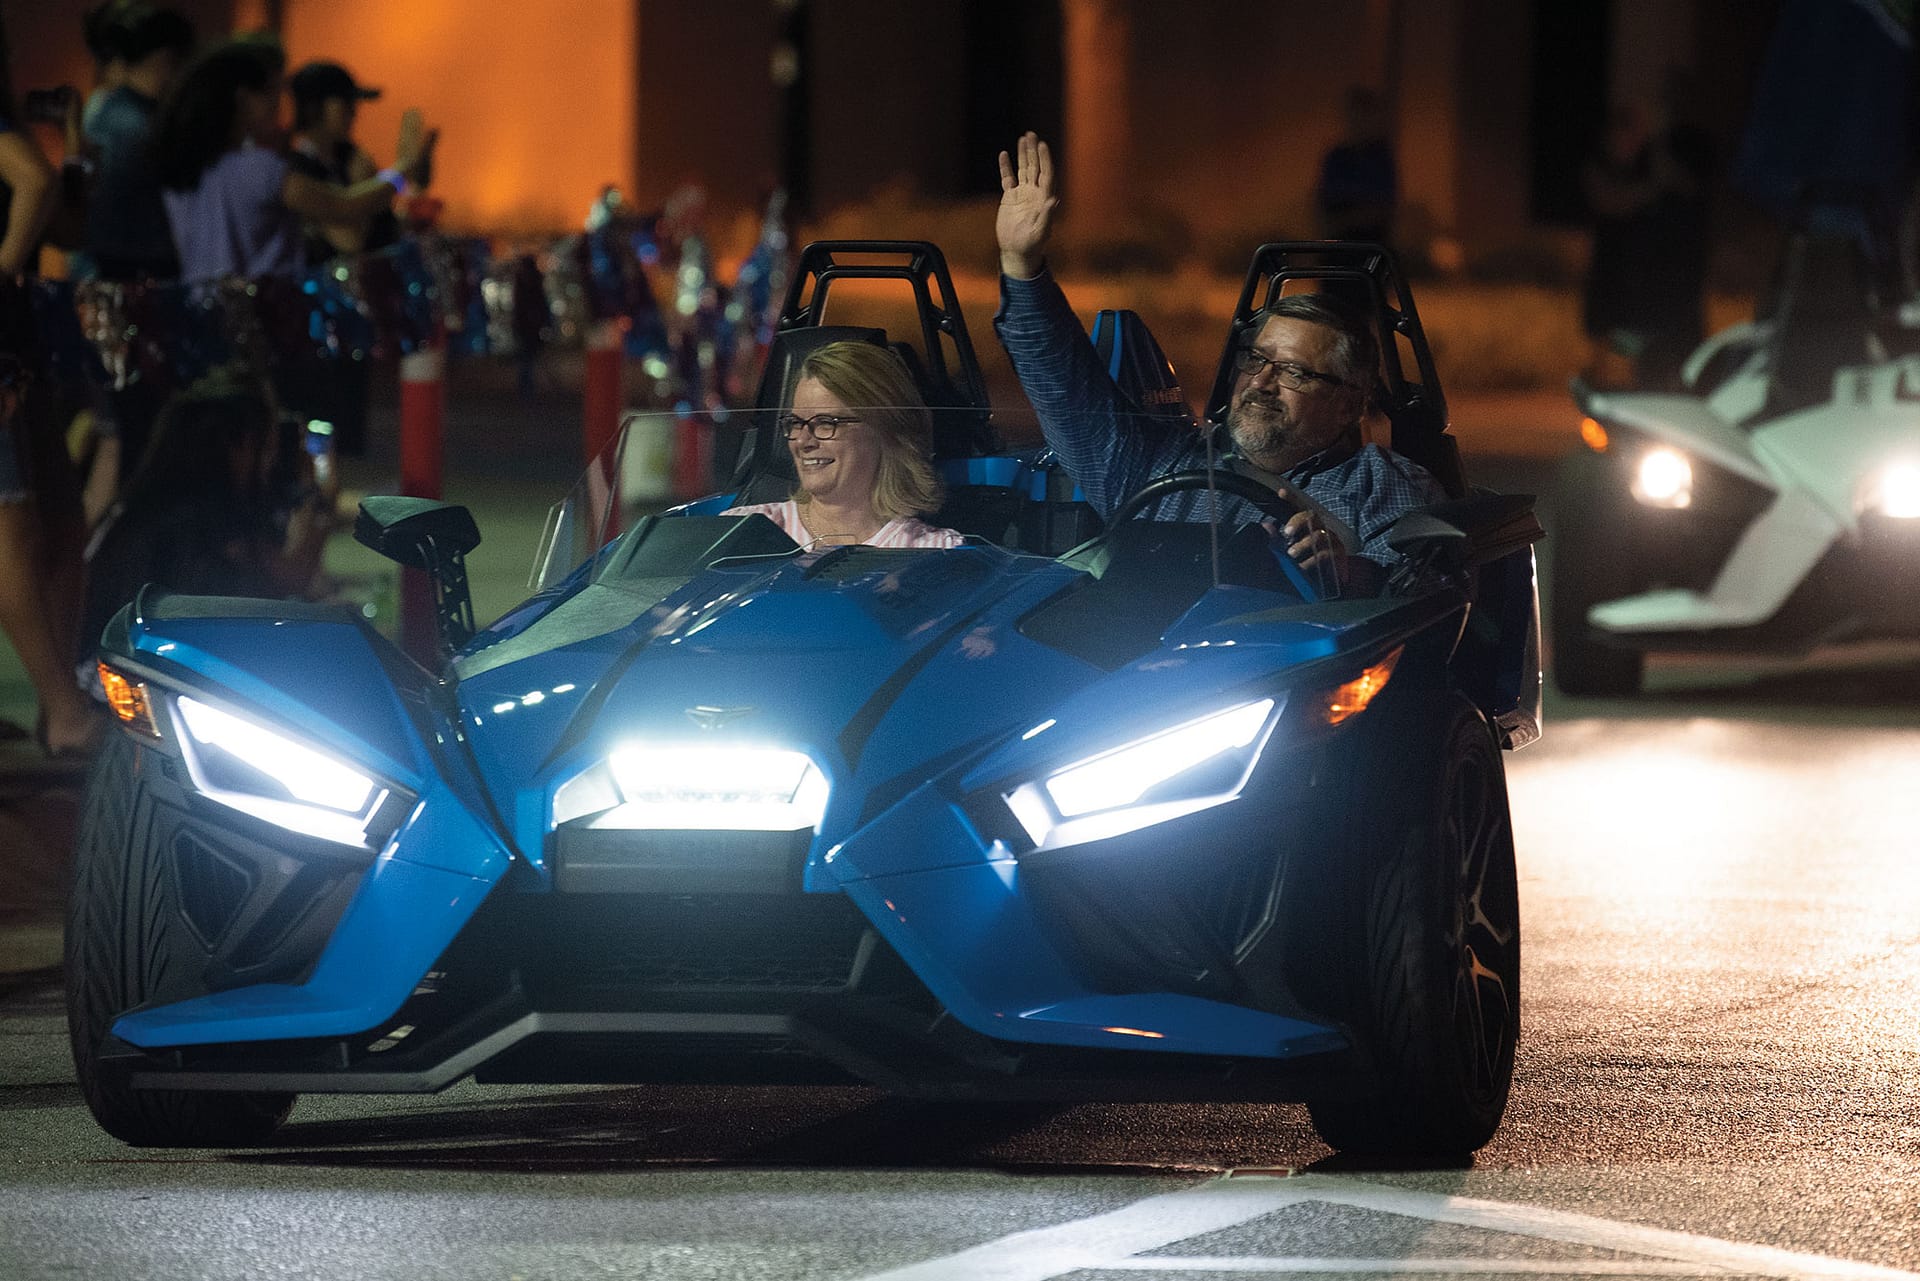 Dr. and Mrs. Shoemaker in a car in the 2021 Greek Rush Parade.